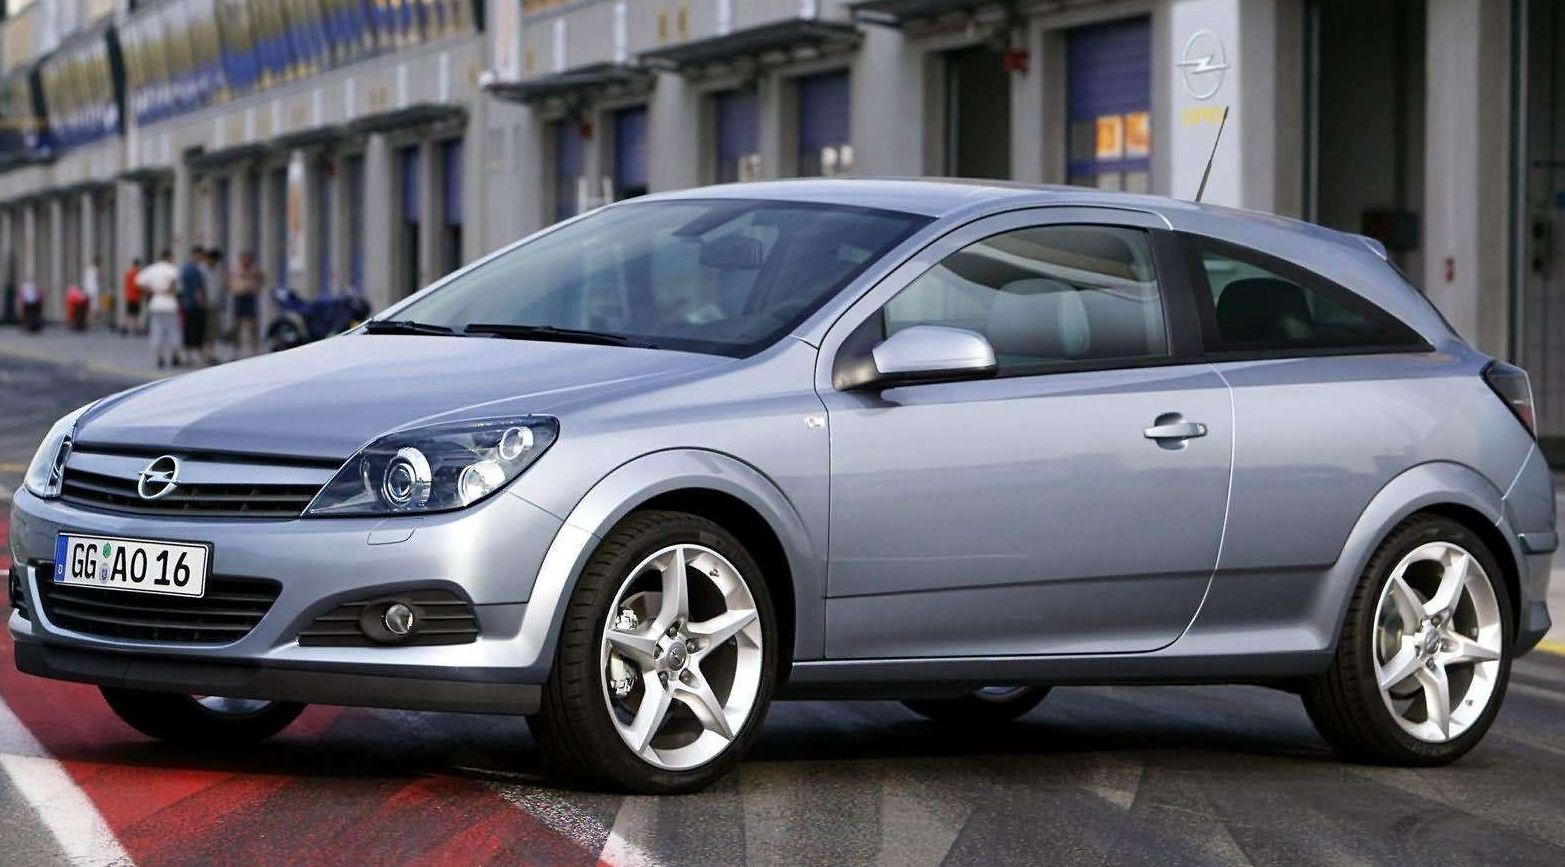 Opel Astra GTC 1.9 CDTI Cosmo 2005 - Specs, Review & Tests